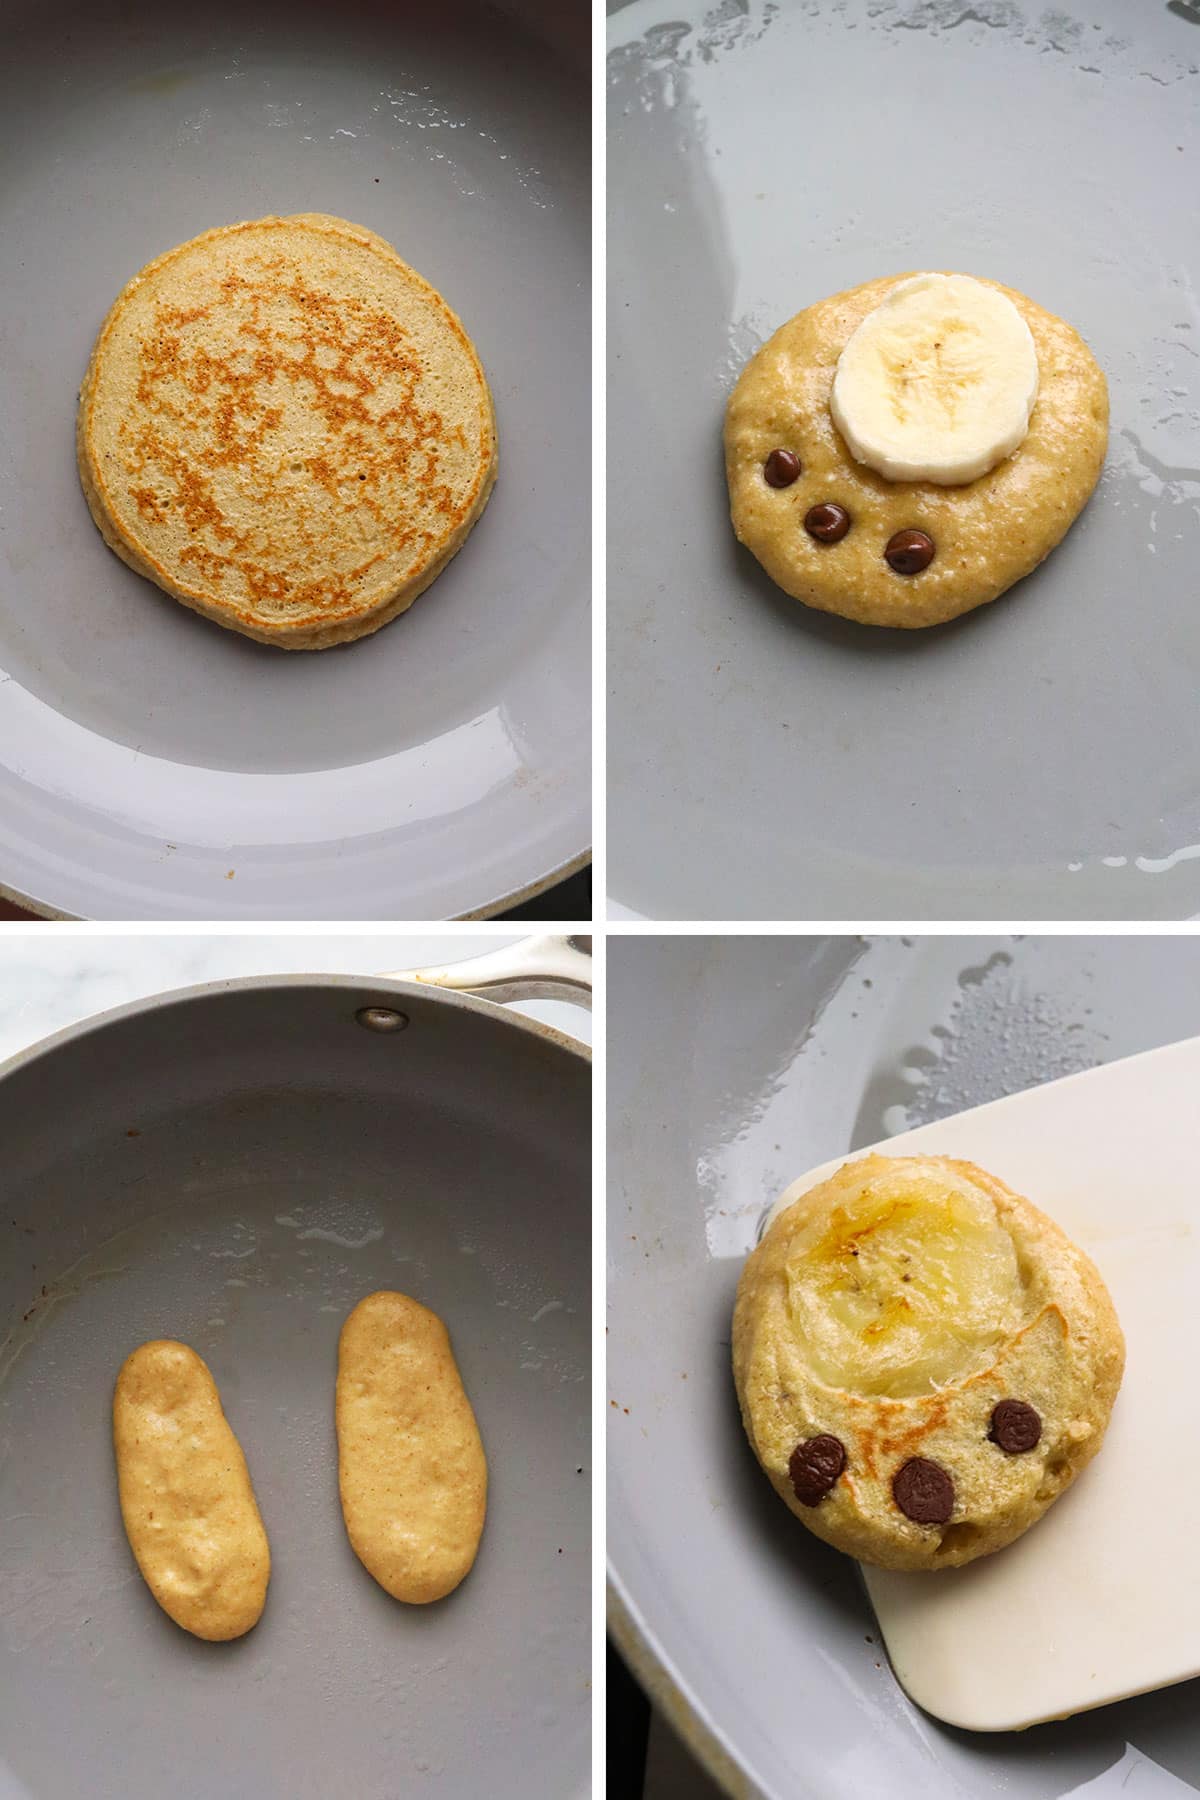 pancakes shaped like a bunny head, ears, and feet cooked in a skillet.